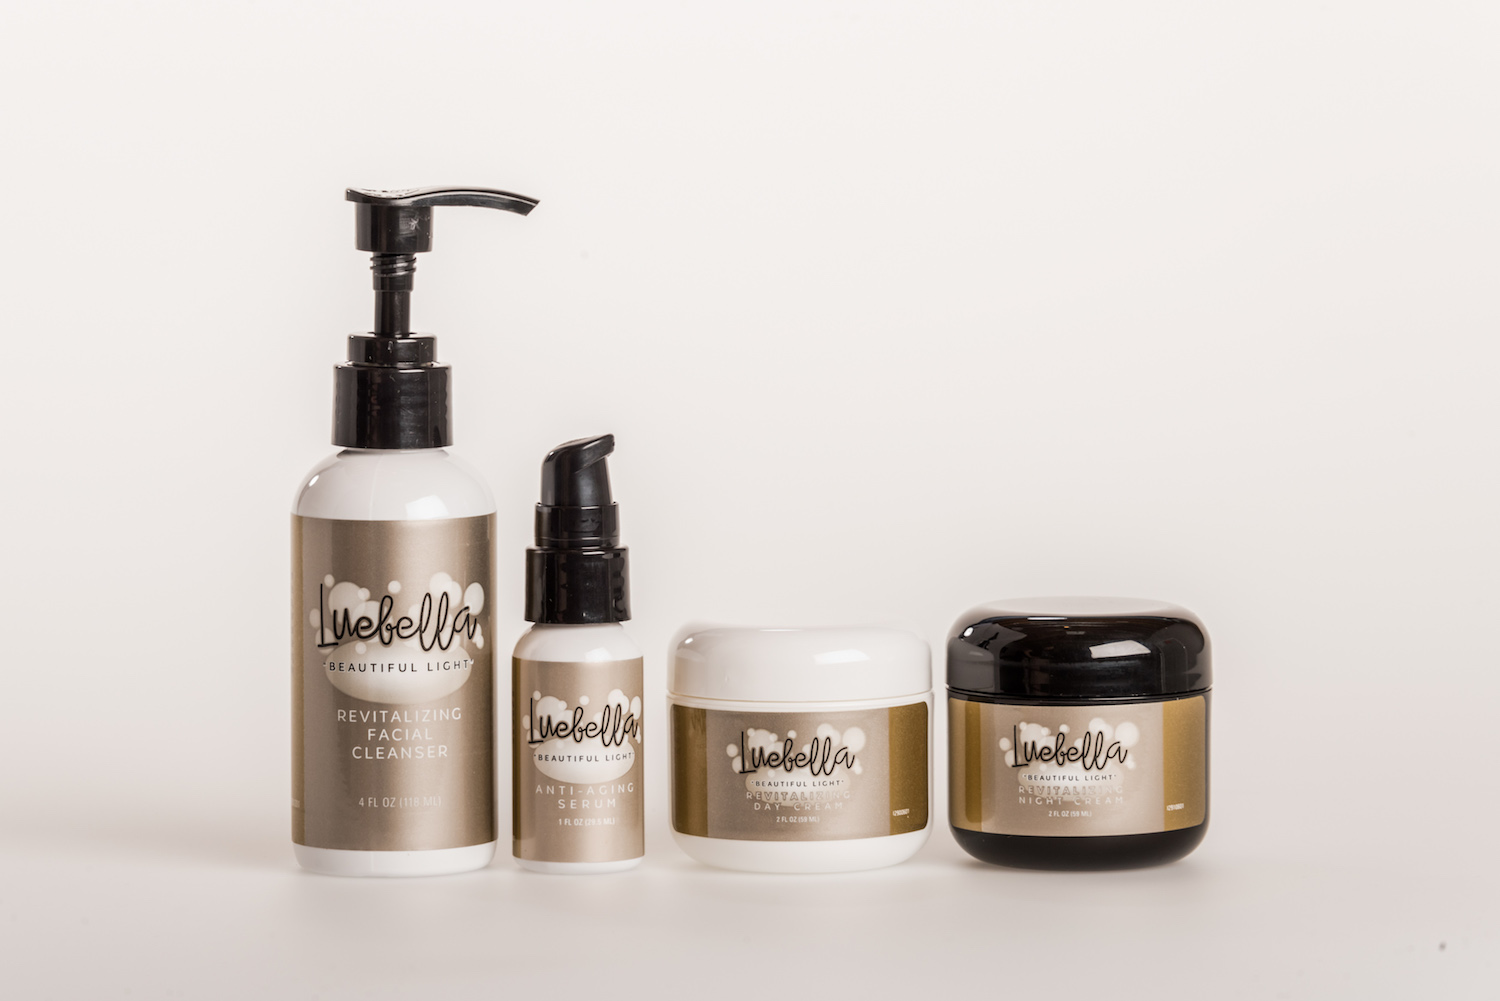 Our Luebella skin care system can help you break bad skin care habits with a whole kit of products.